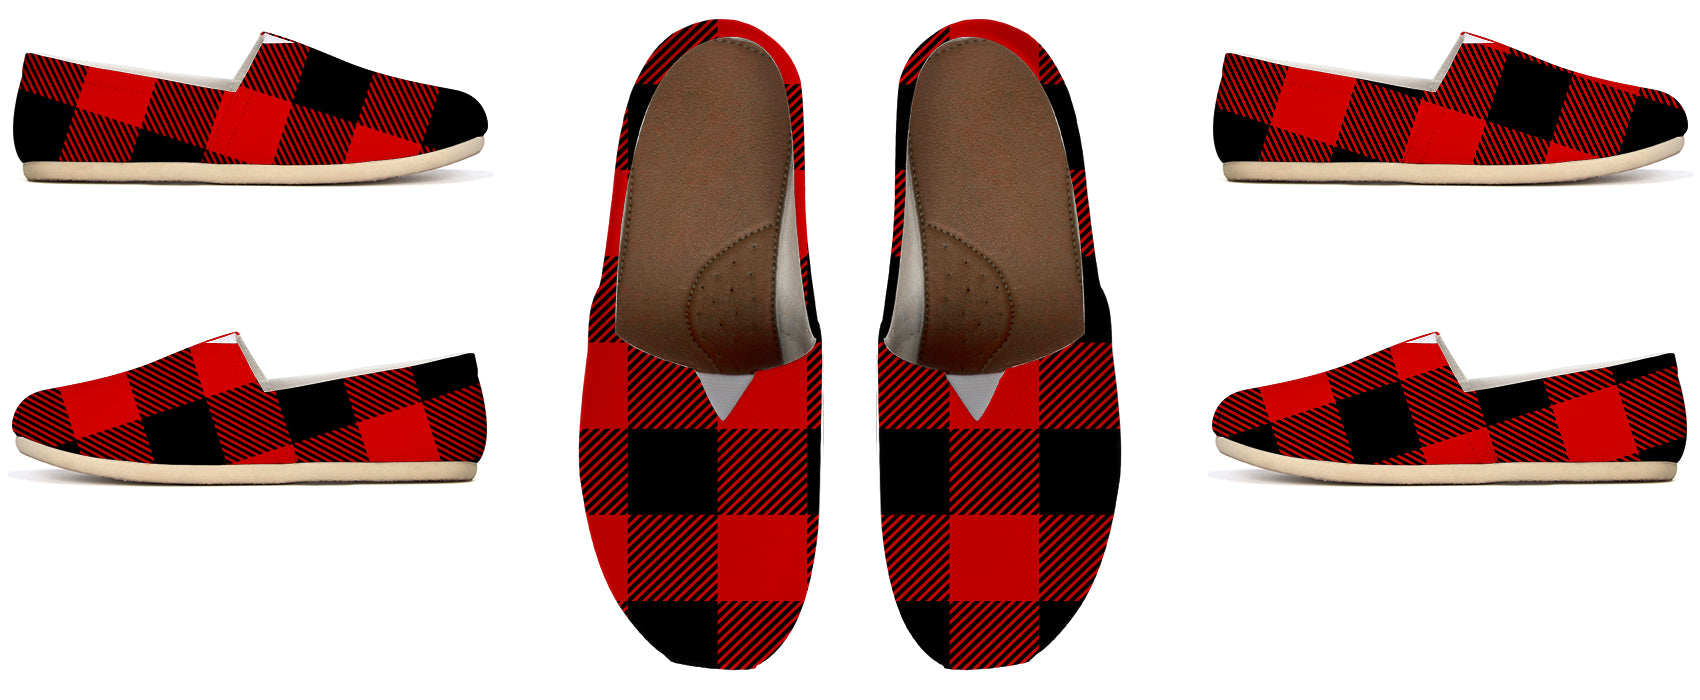 red plaid womens shoes